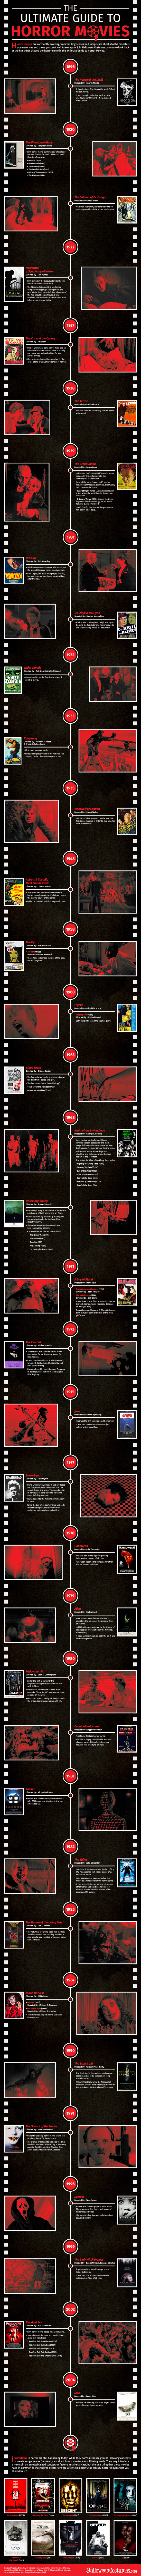 The Ultimate Guide to Horror Movies - Infographic